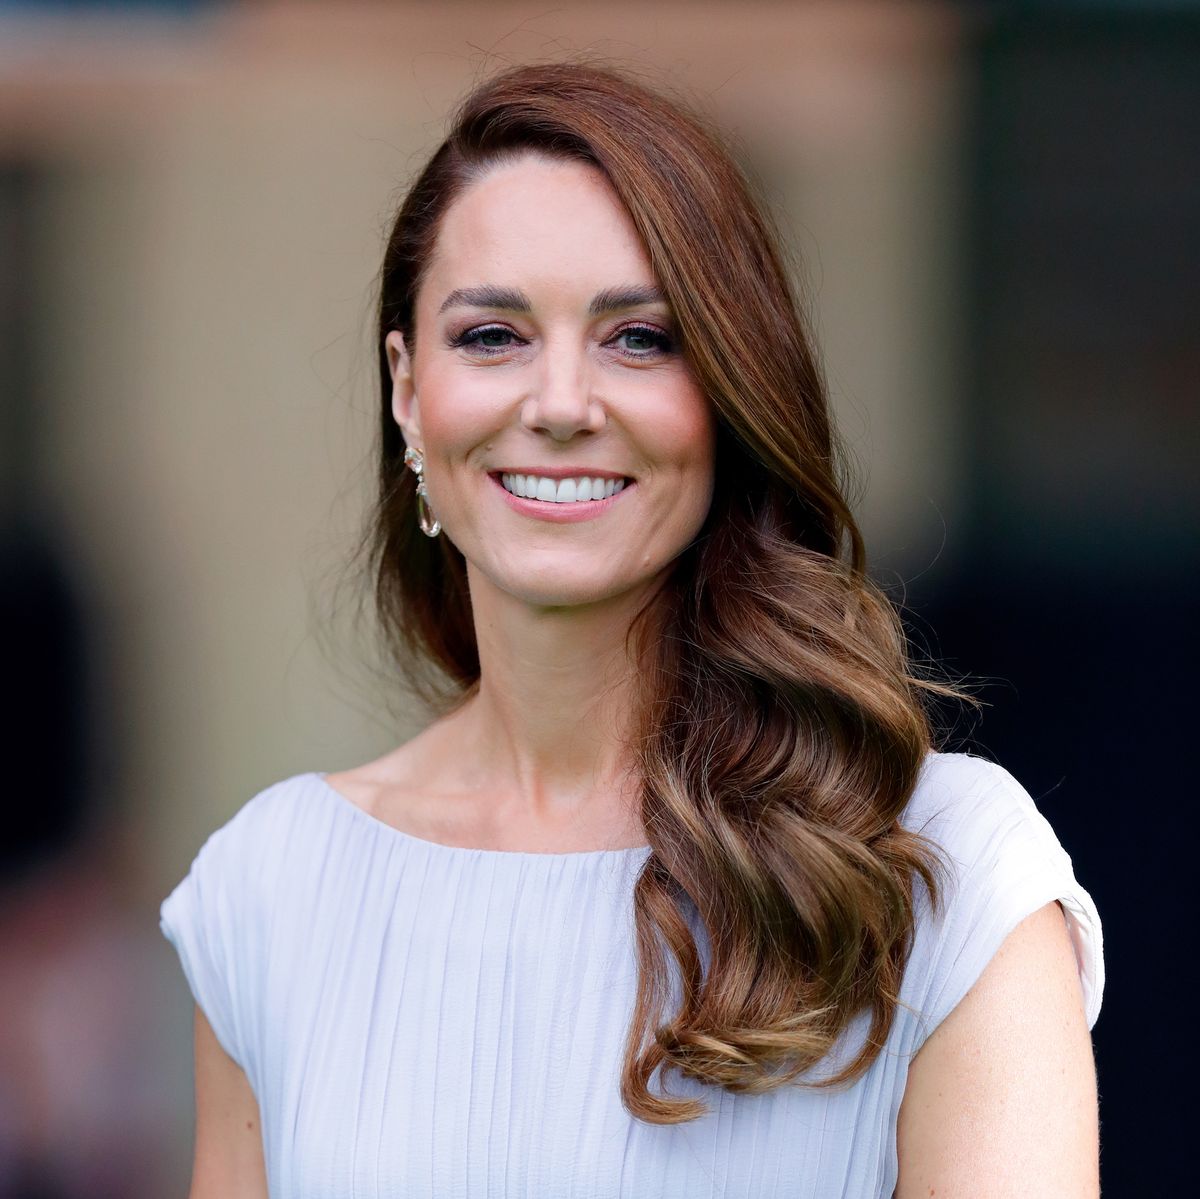 Kate Middleton's diet and routine uncovered